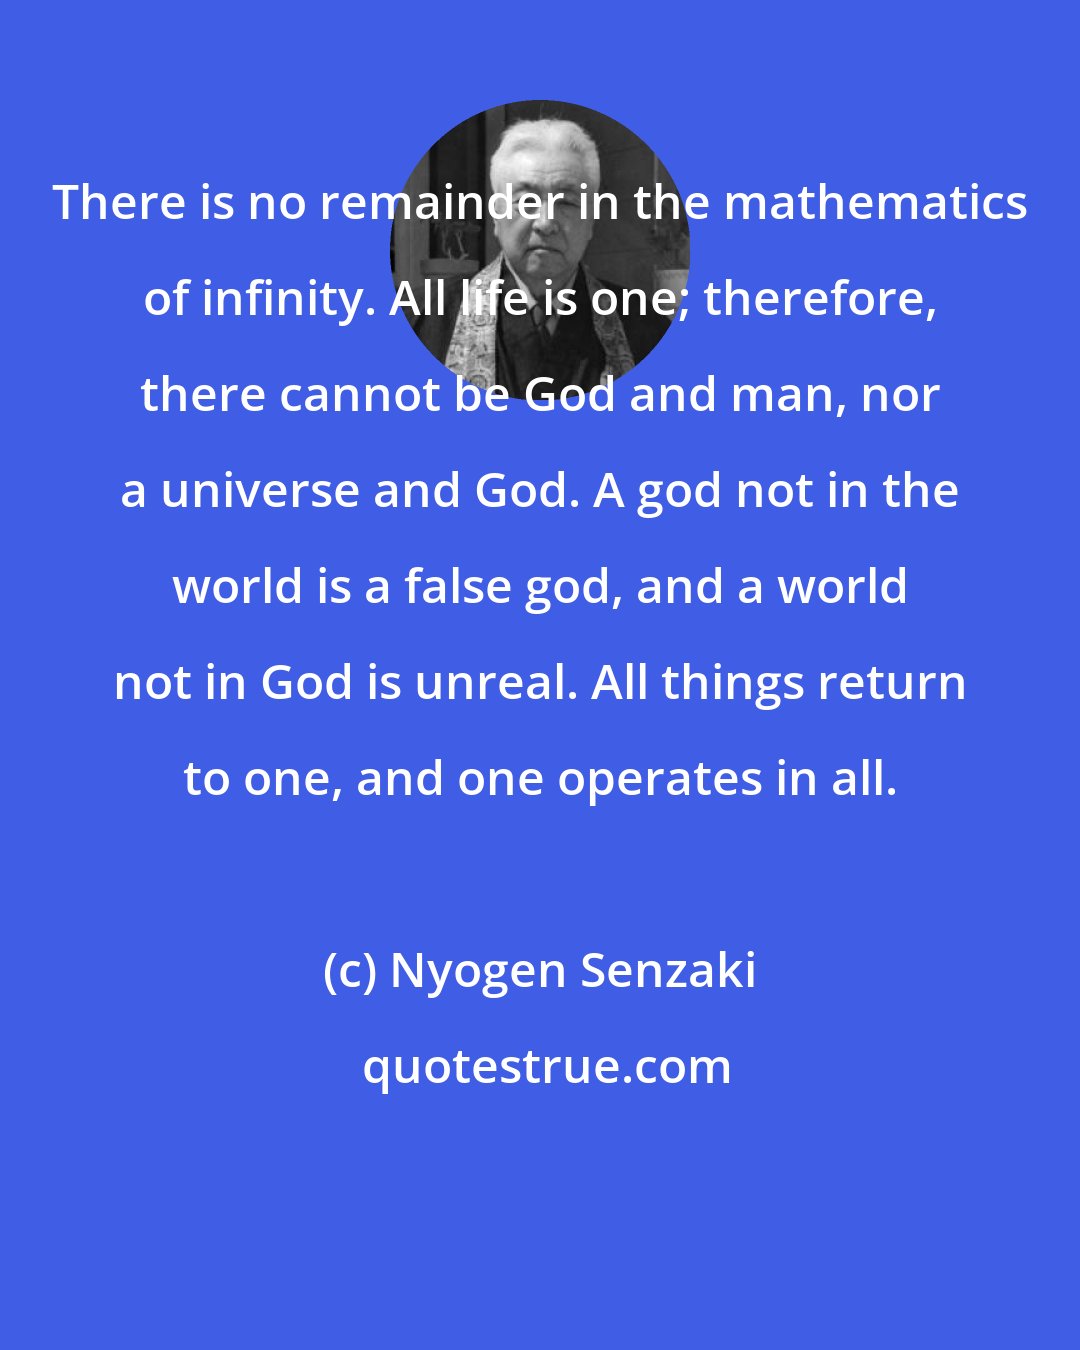 Nyogen Senzaki: There is no remainder in the mathematics of infinity. All life is one; therefore, there cannot be God and man, nor a universe and God. A god not in the world is a false god, and a world not in God is unreal. All things return to one, and one operates in all.